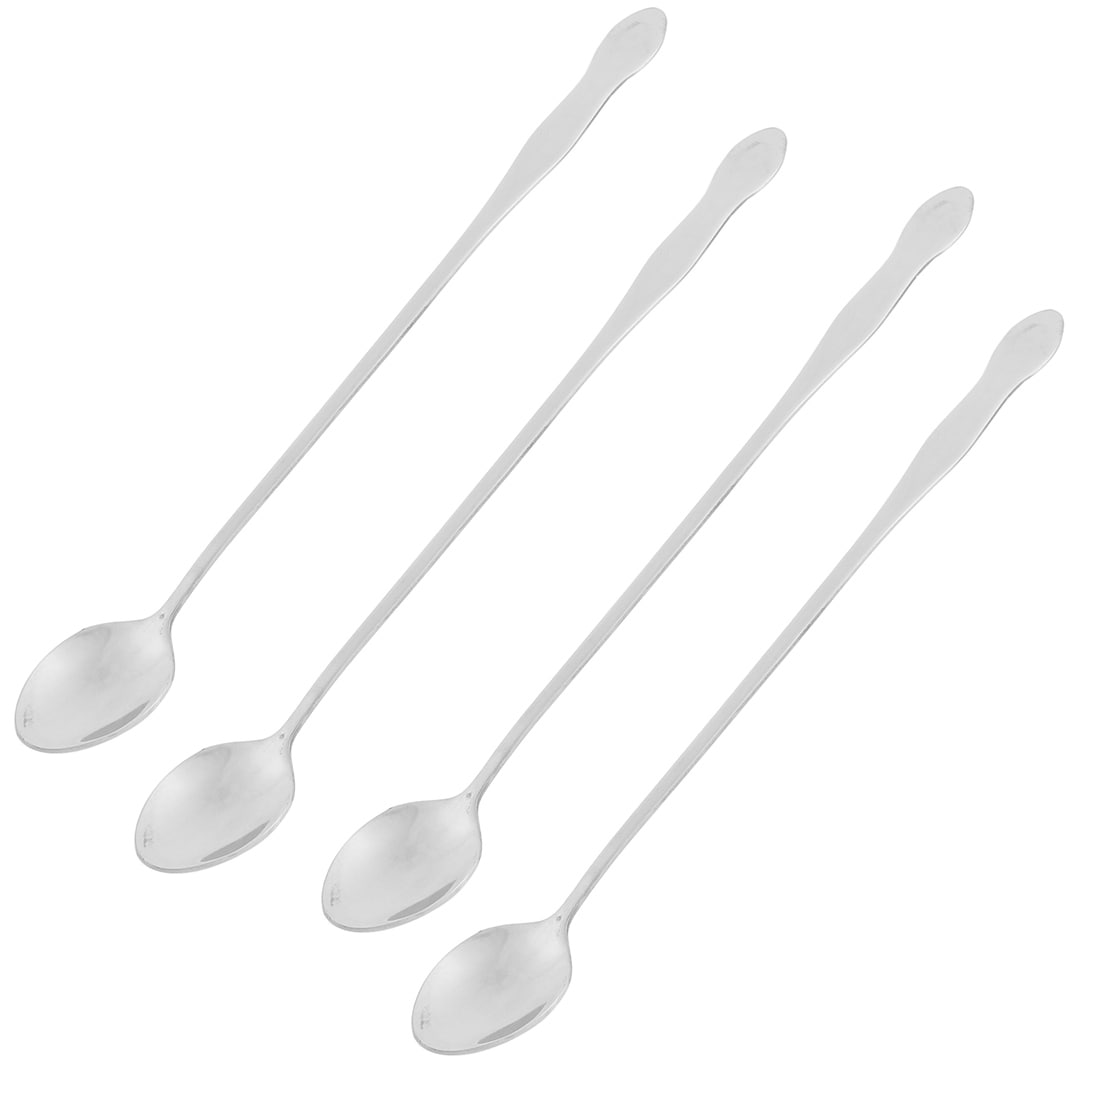 https://ak1.ostkcdn.com/images/products/is/images/direct/00cee01bc32040e79e5d9ddba3c2e636aece709a/Stainless-Steel-Long-Handle-Tea-Coffee-Ice-Cream-Spoon-Silver-Tone-4pcs.jpg